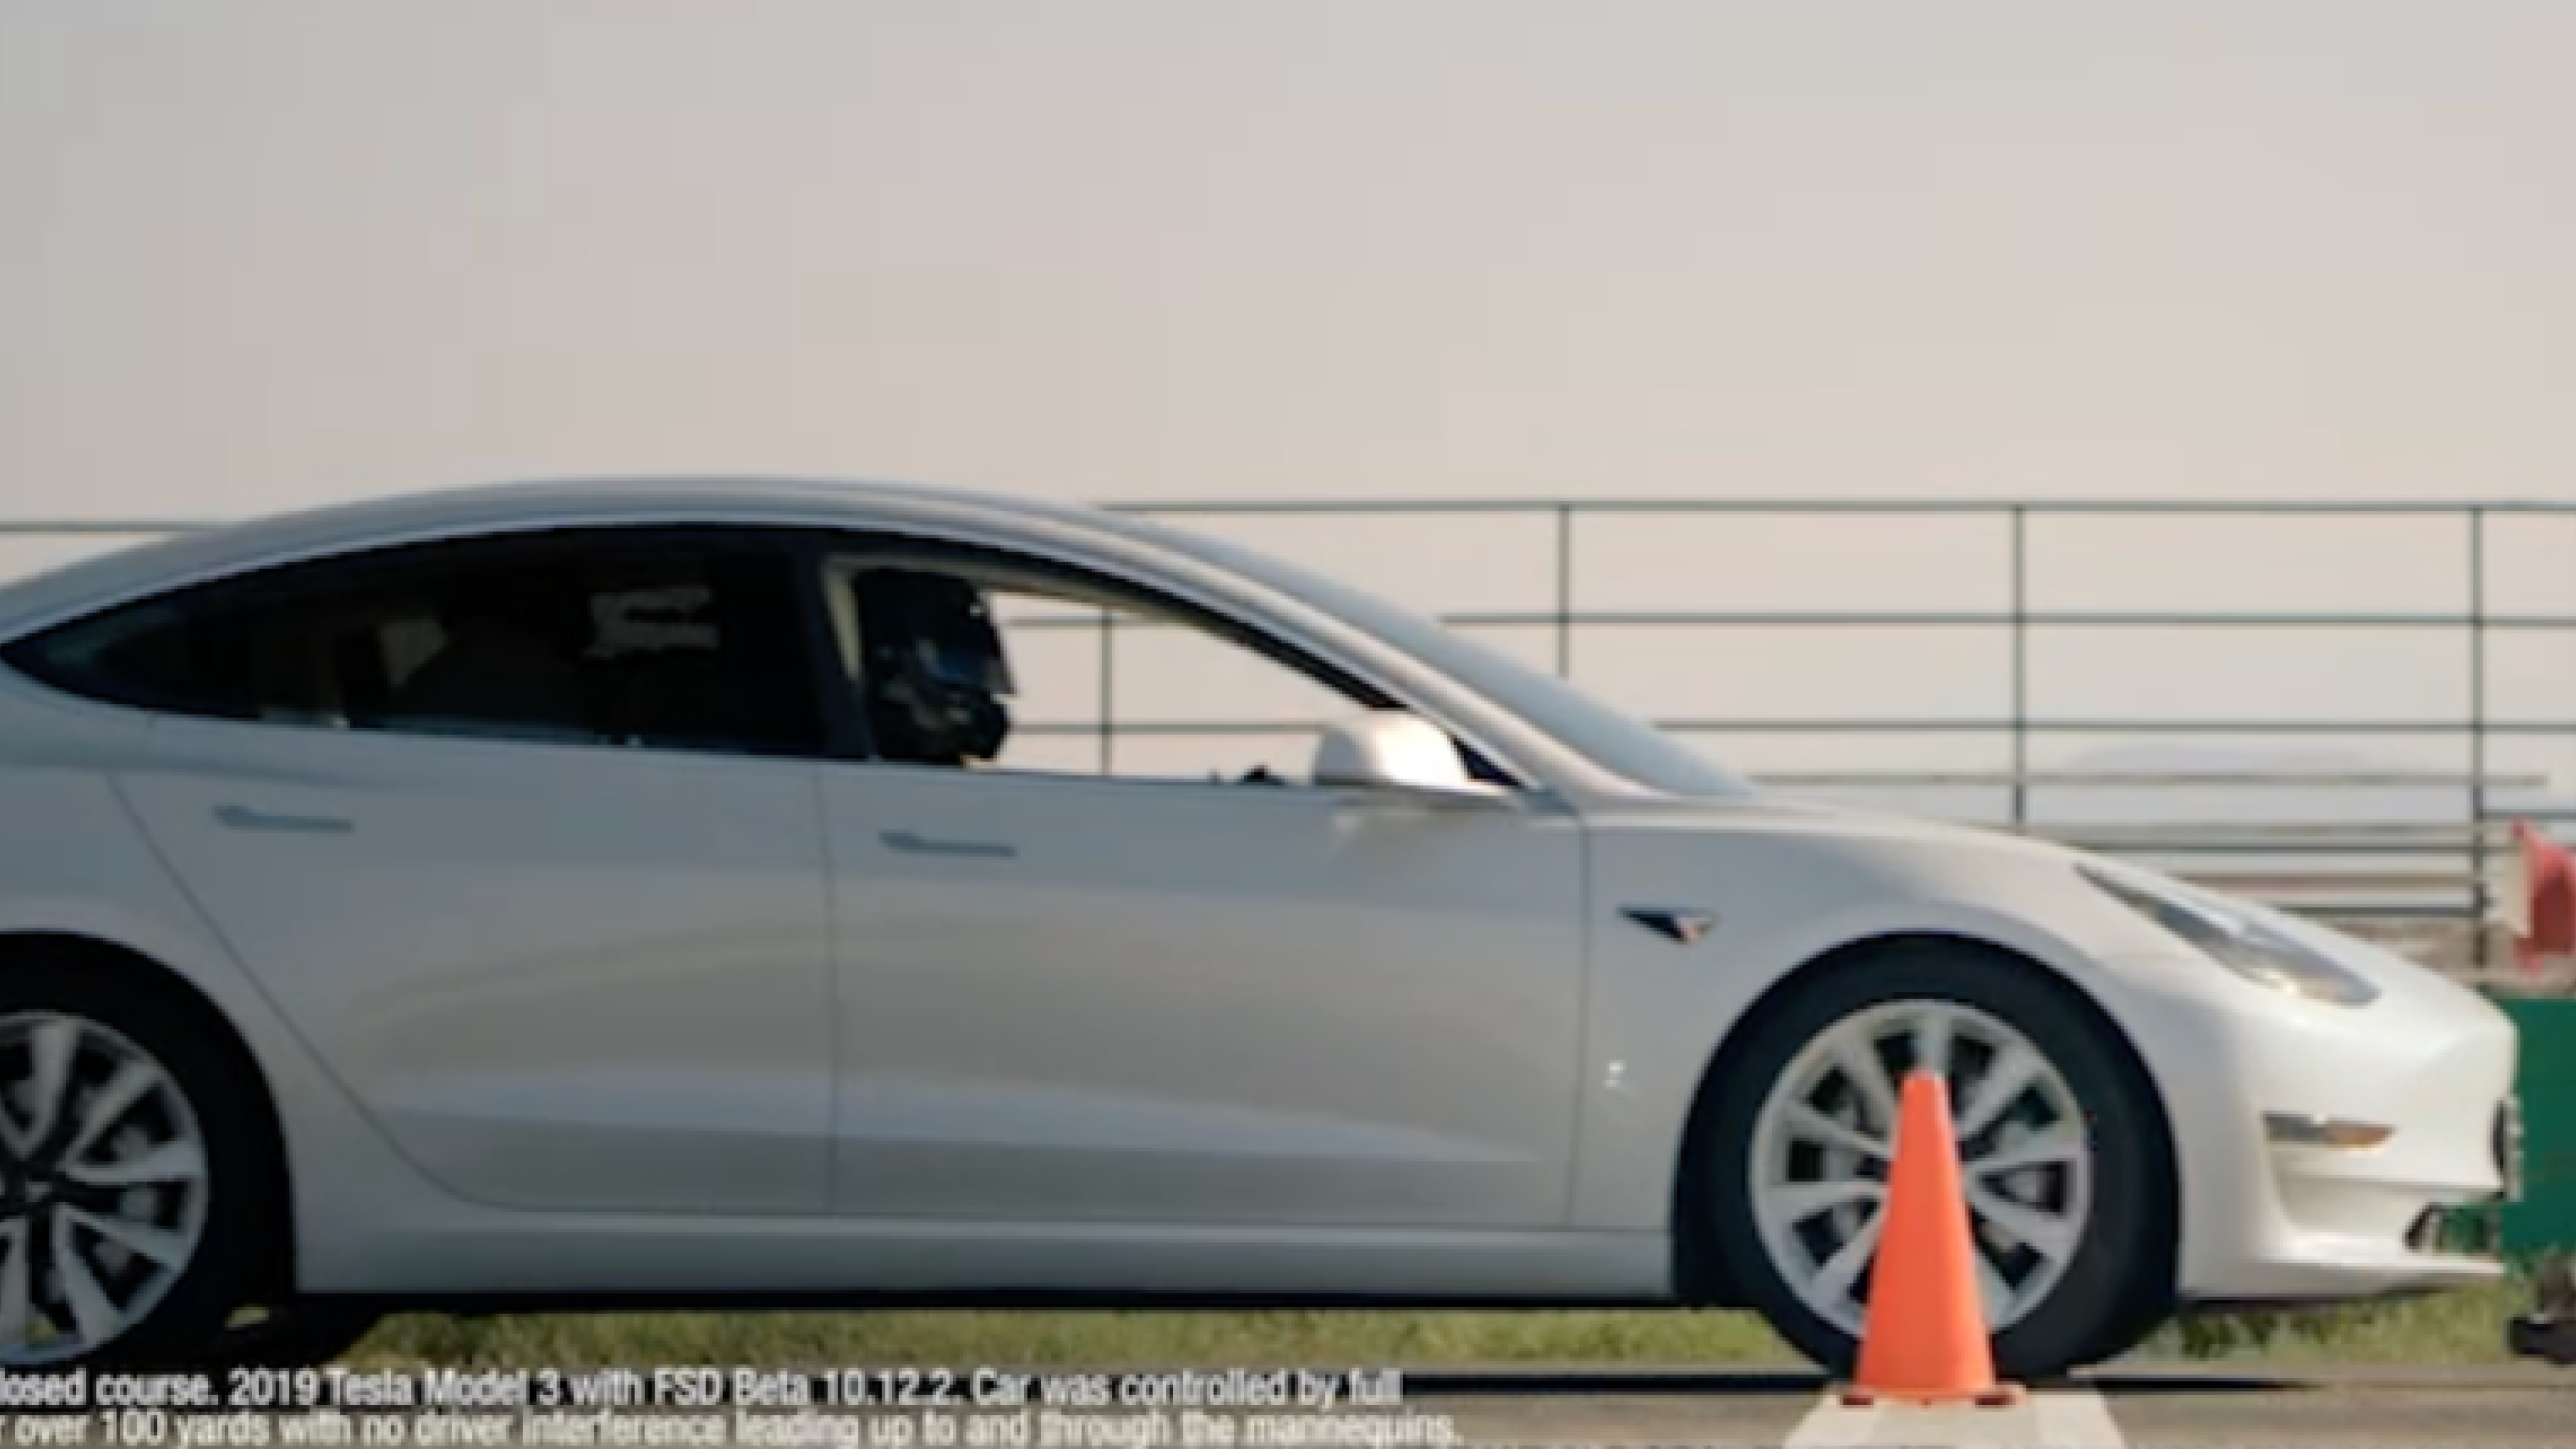 Professional commercial director released unofficial Tesla TV ad [Video]